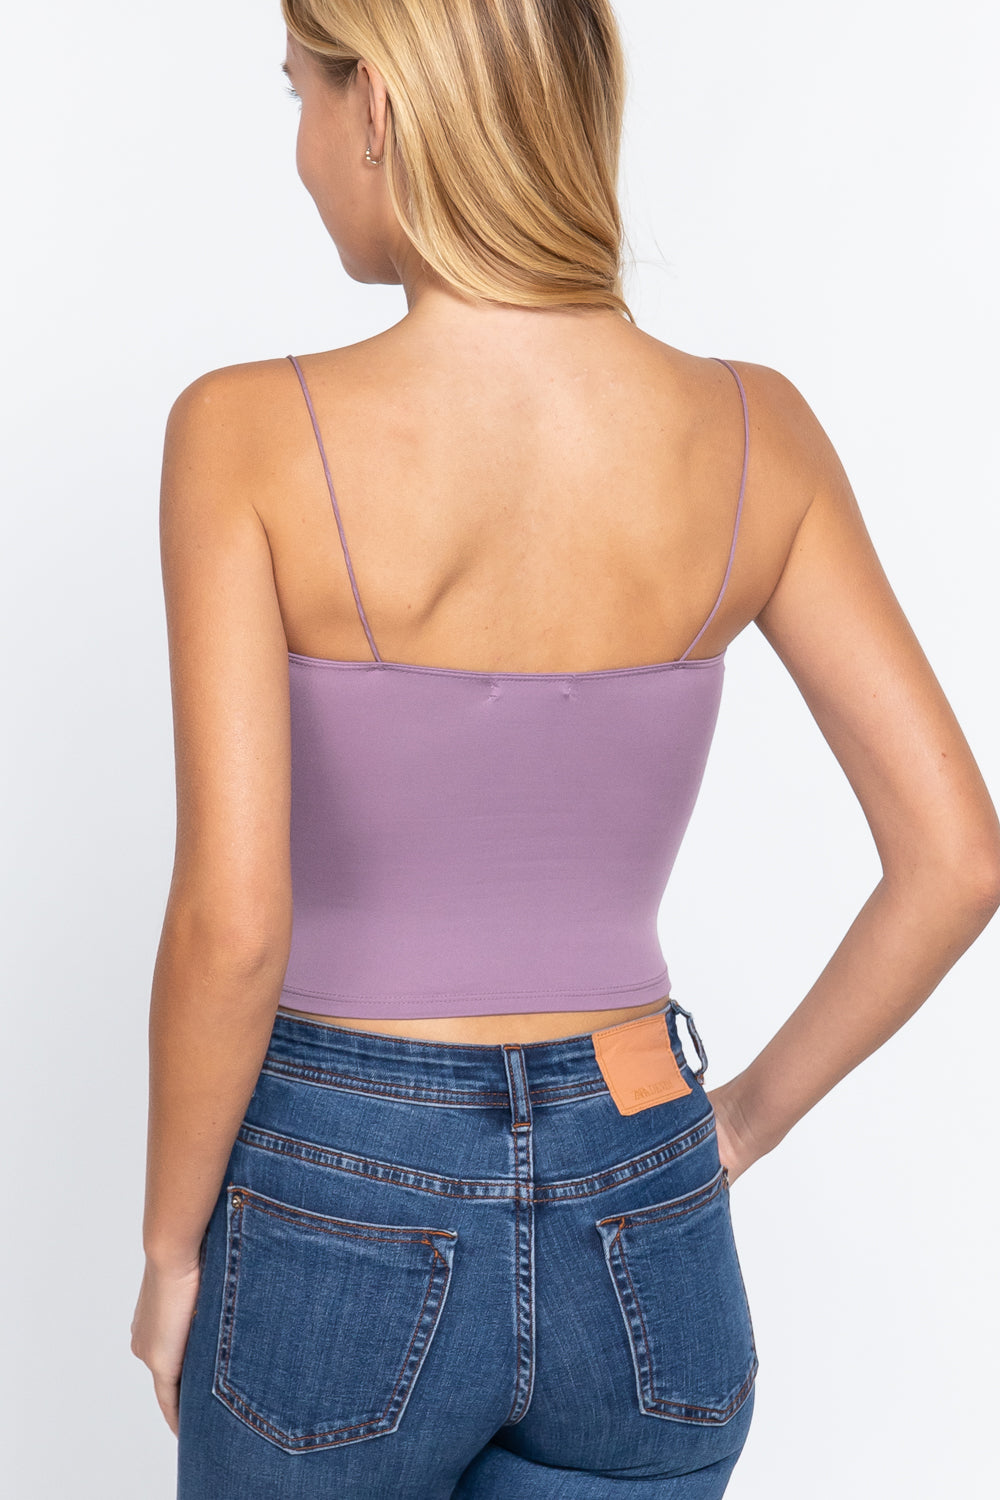 Elastic Strap Two Ply Dty Brushed Knit Cami Top Sunny EvE Fashion